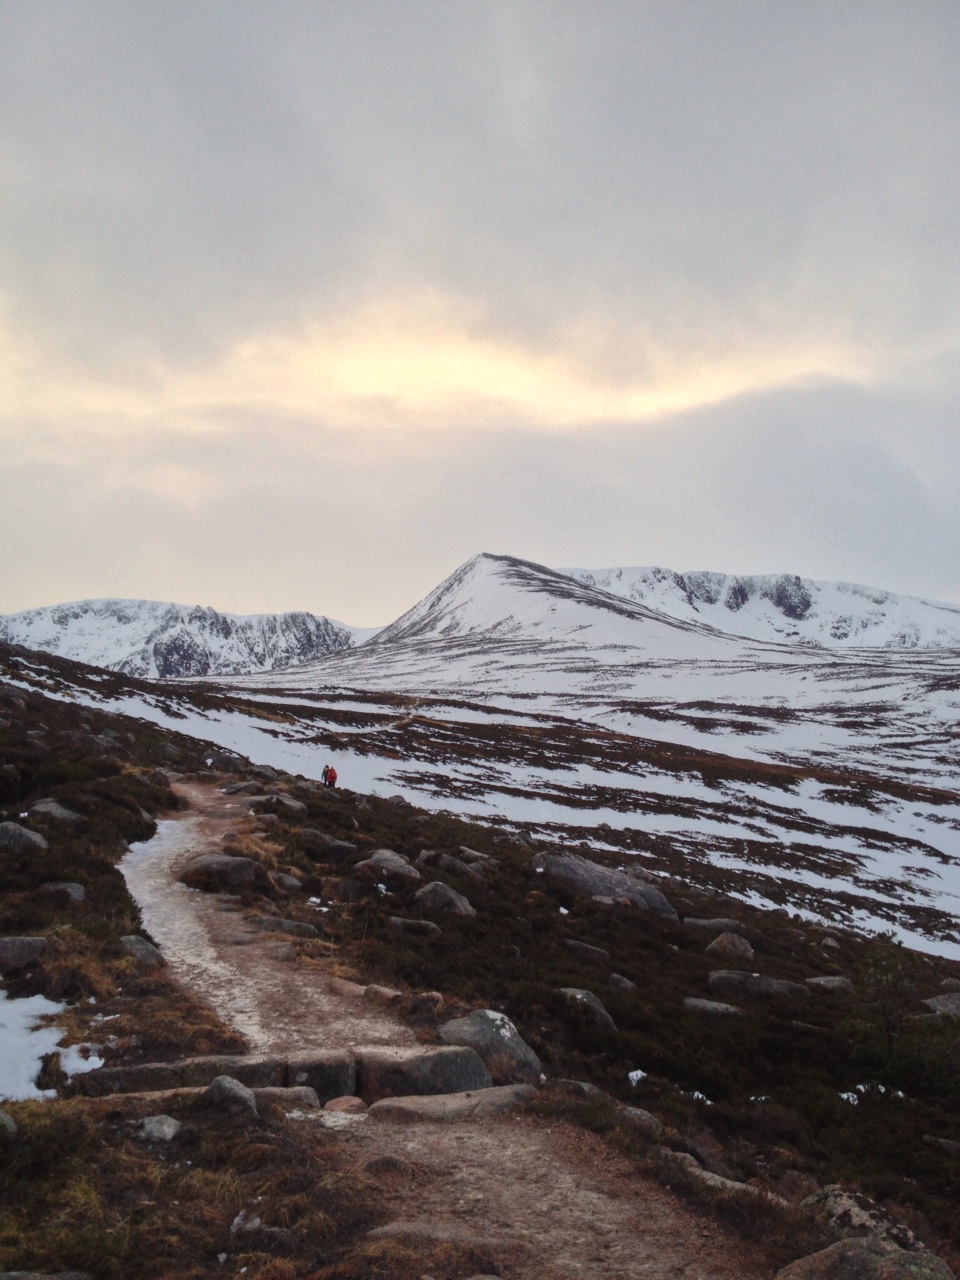 Walking in the Cairngorms